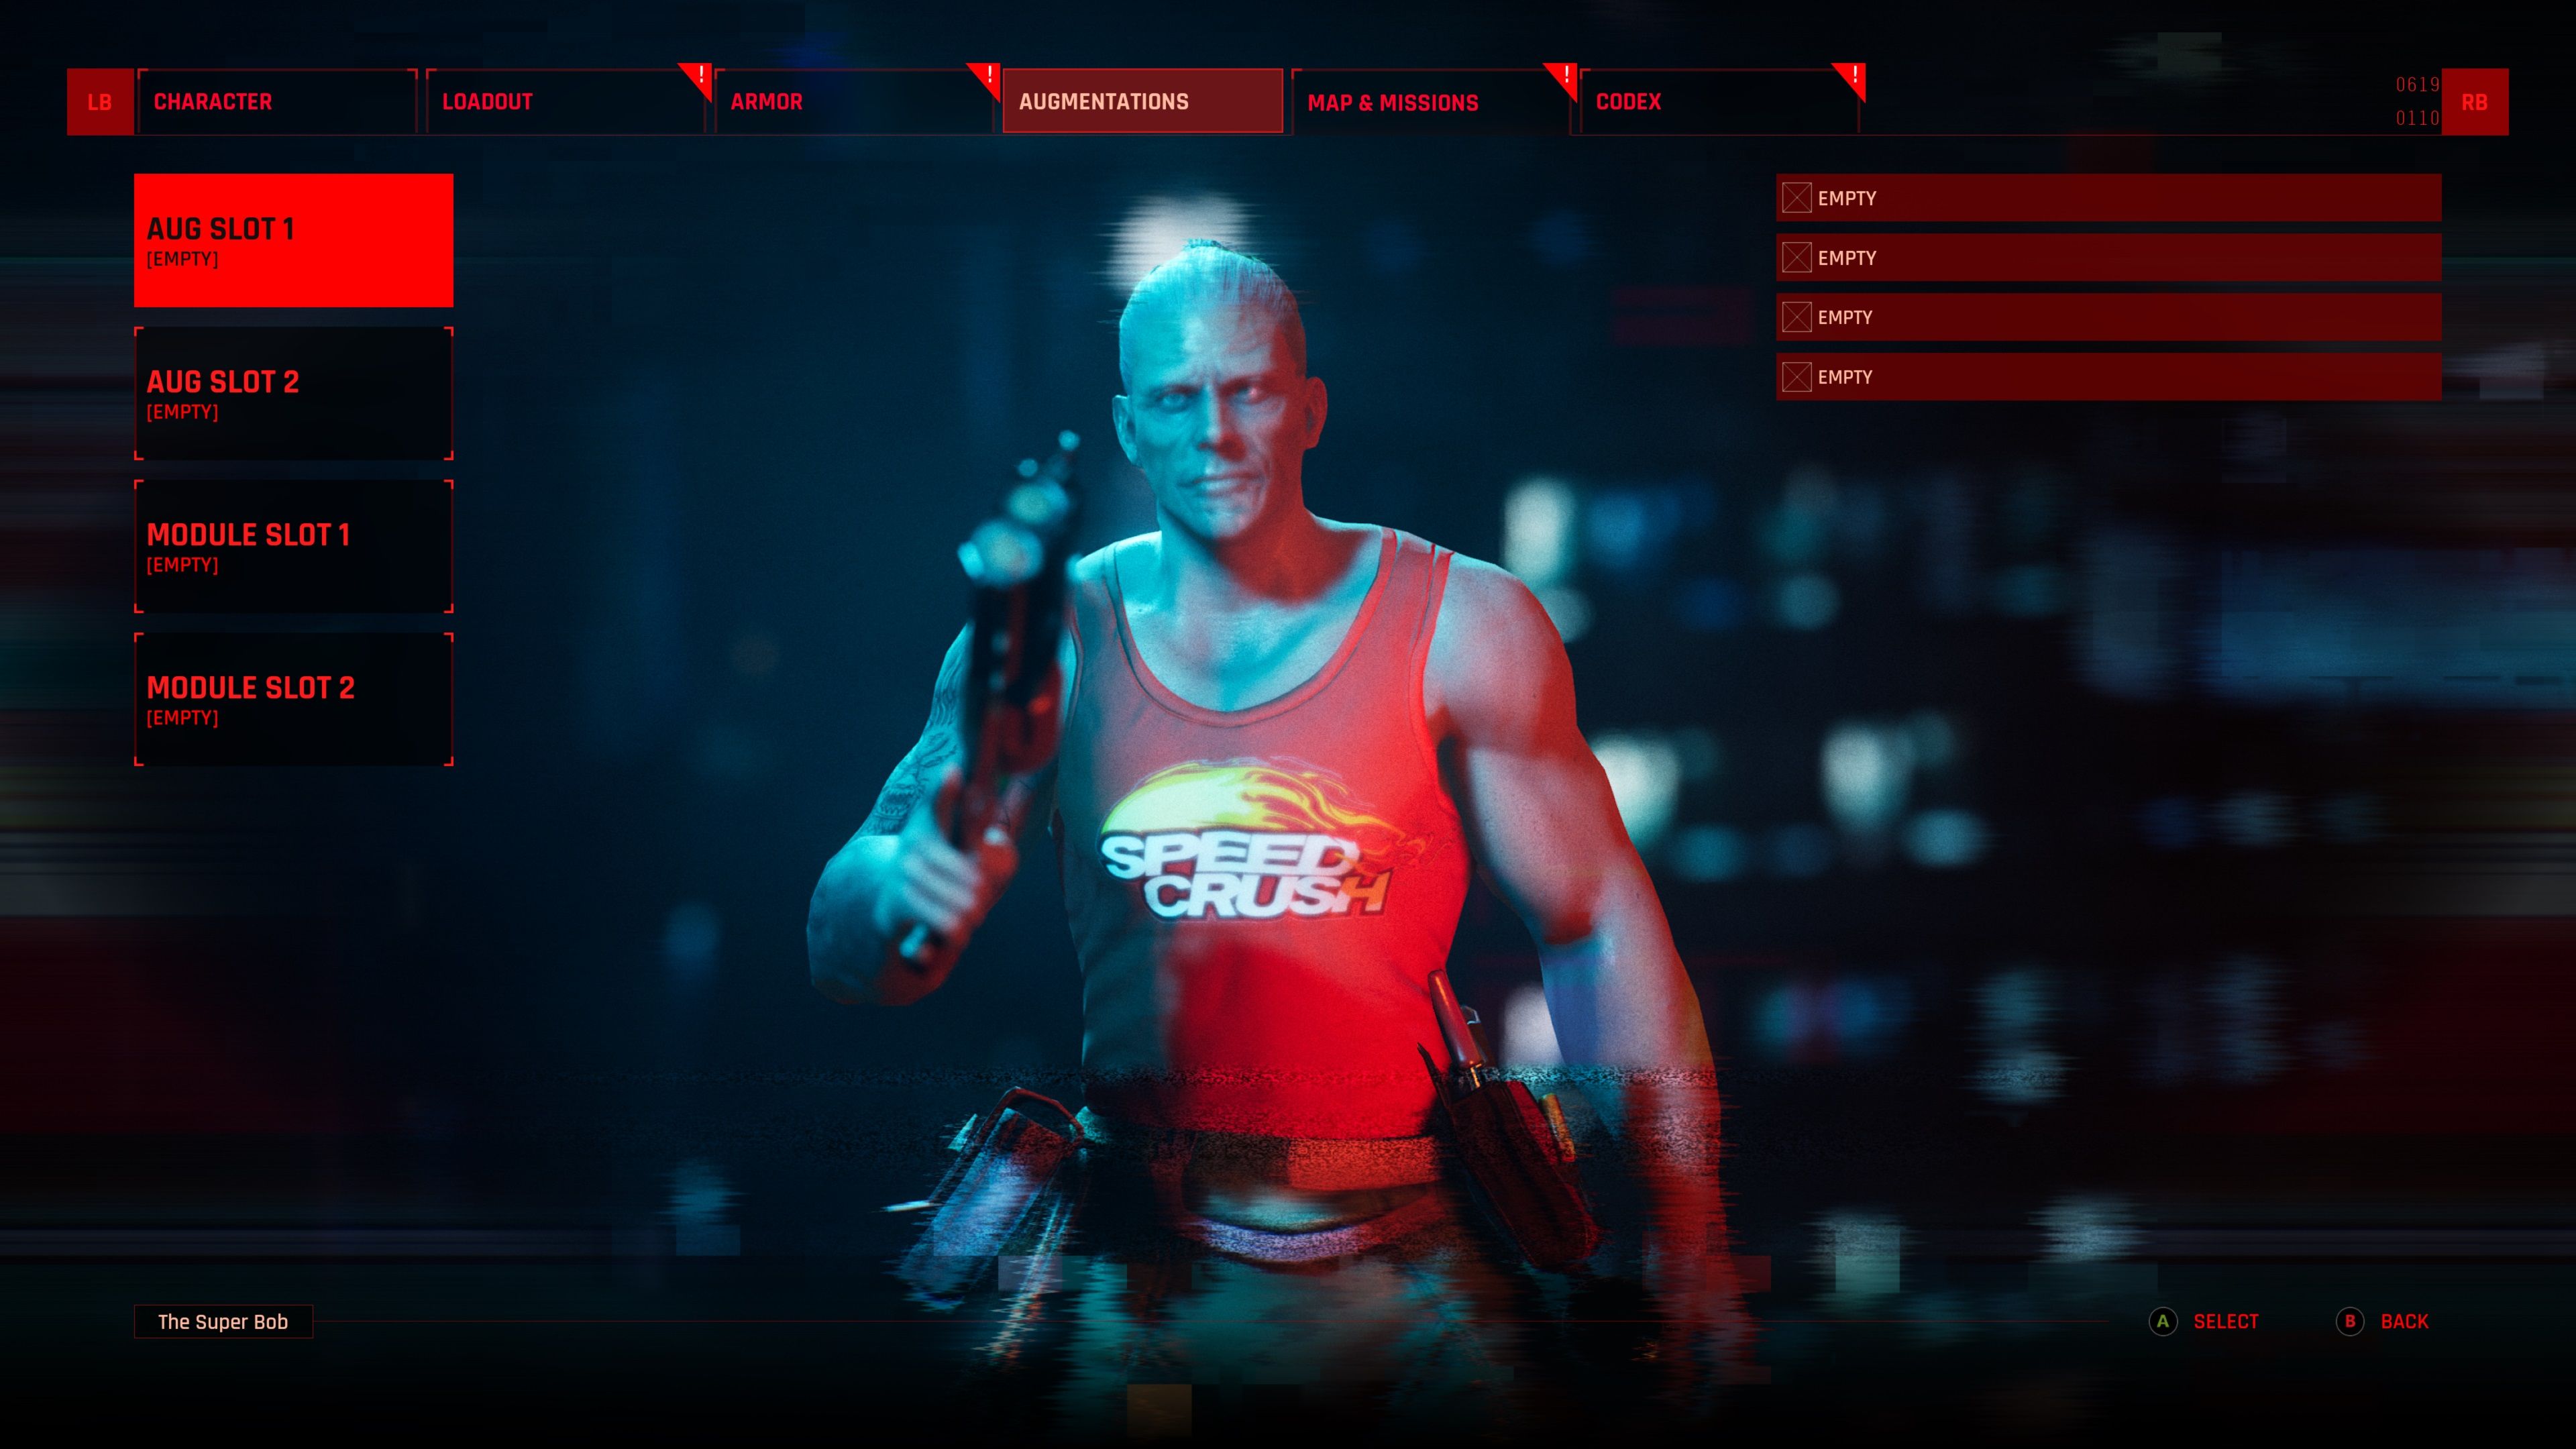 A screenshot from The Ascent showing the character creator.